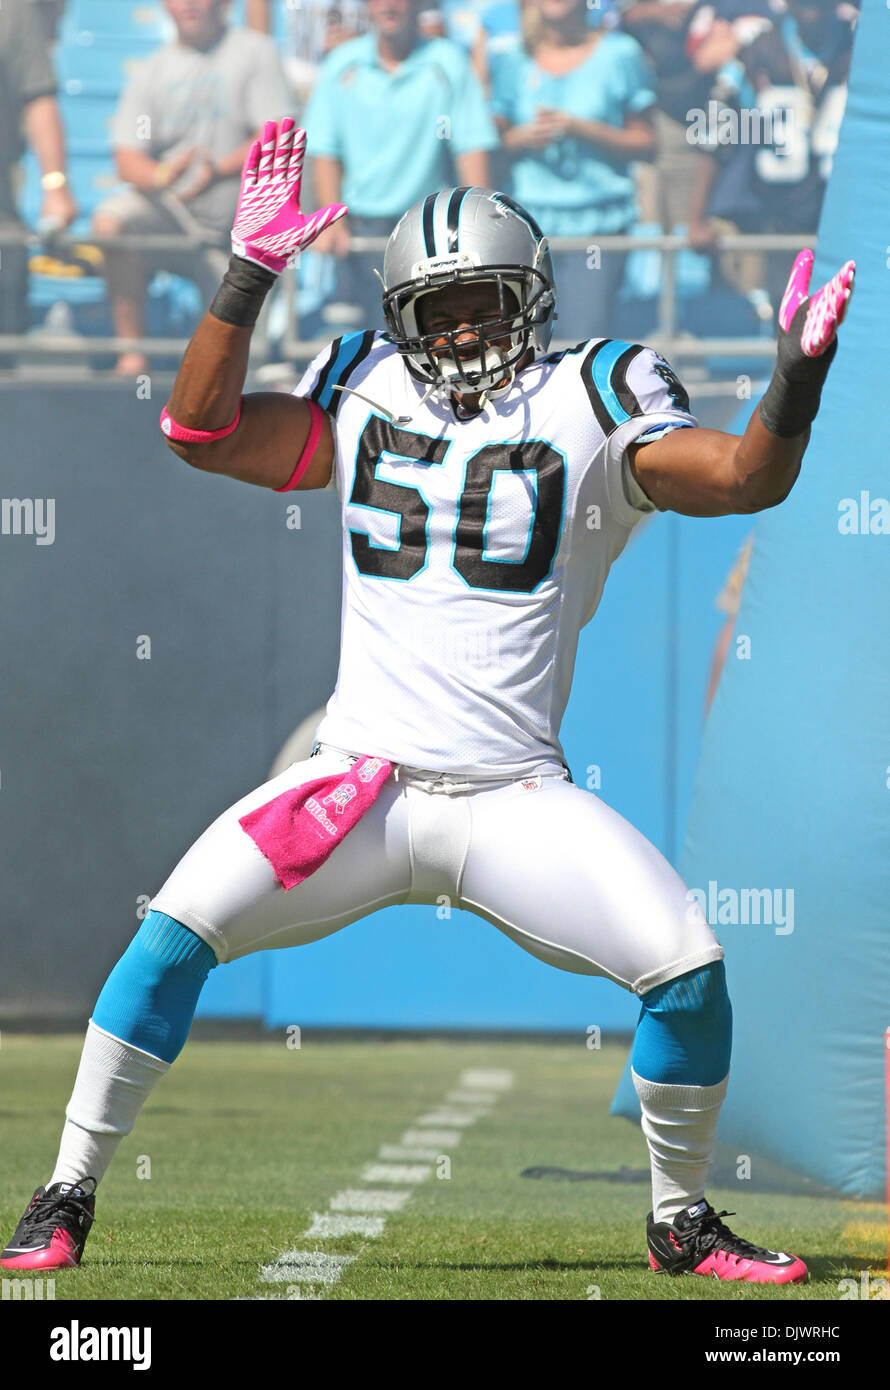 Oct. 10, 2010 - Charlotte, North Carolina, United States of America - Carolina Panthers linebacker James Anderson (50) prepares for the start of the game against the Chicago Bears. The Bears defeated the Panthers 23-6 in the game played Sunday at Bank of America Stadium. (Credit Image: © Margaret Bowles/Southcreek Global/ZUMApress.com) Stock Photo